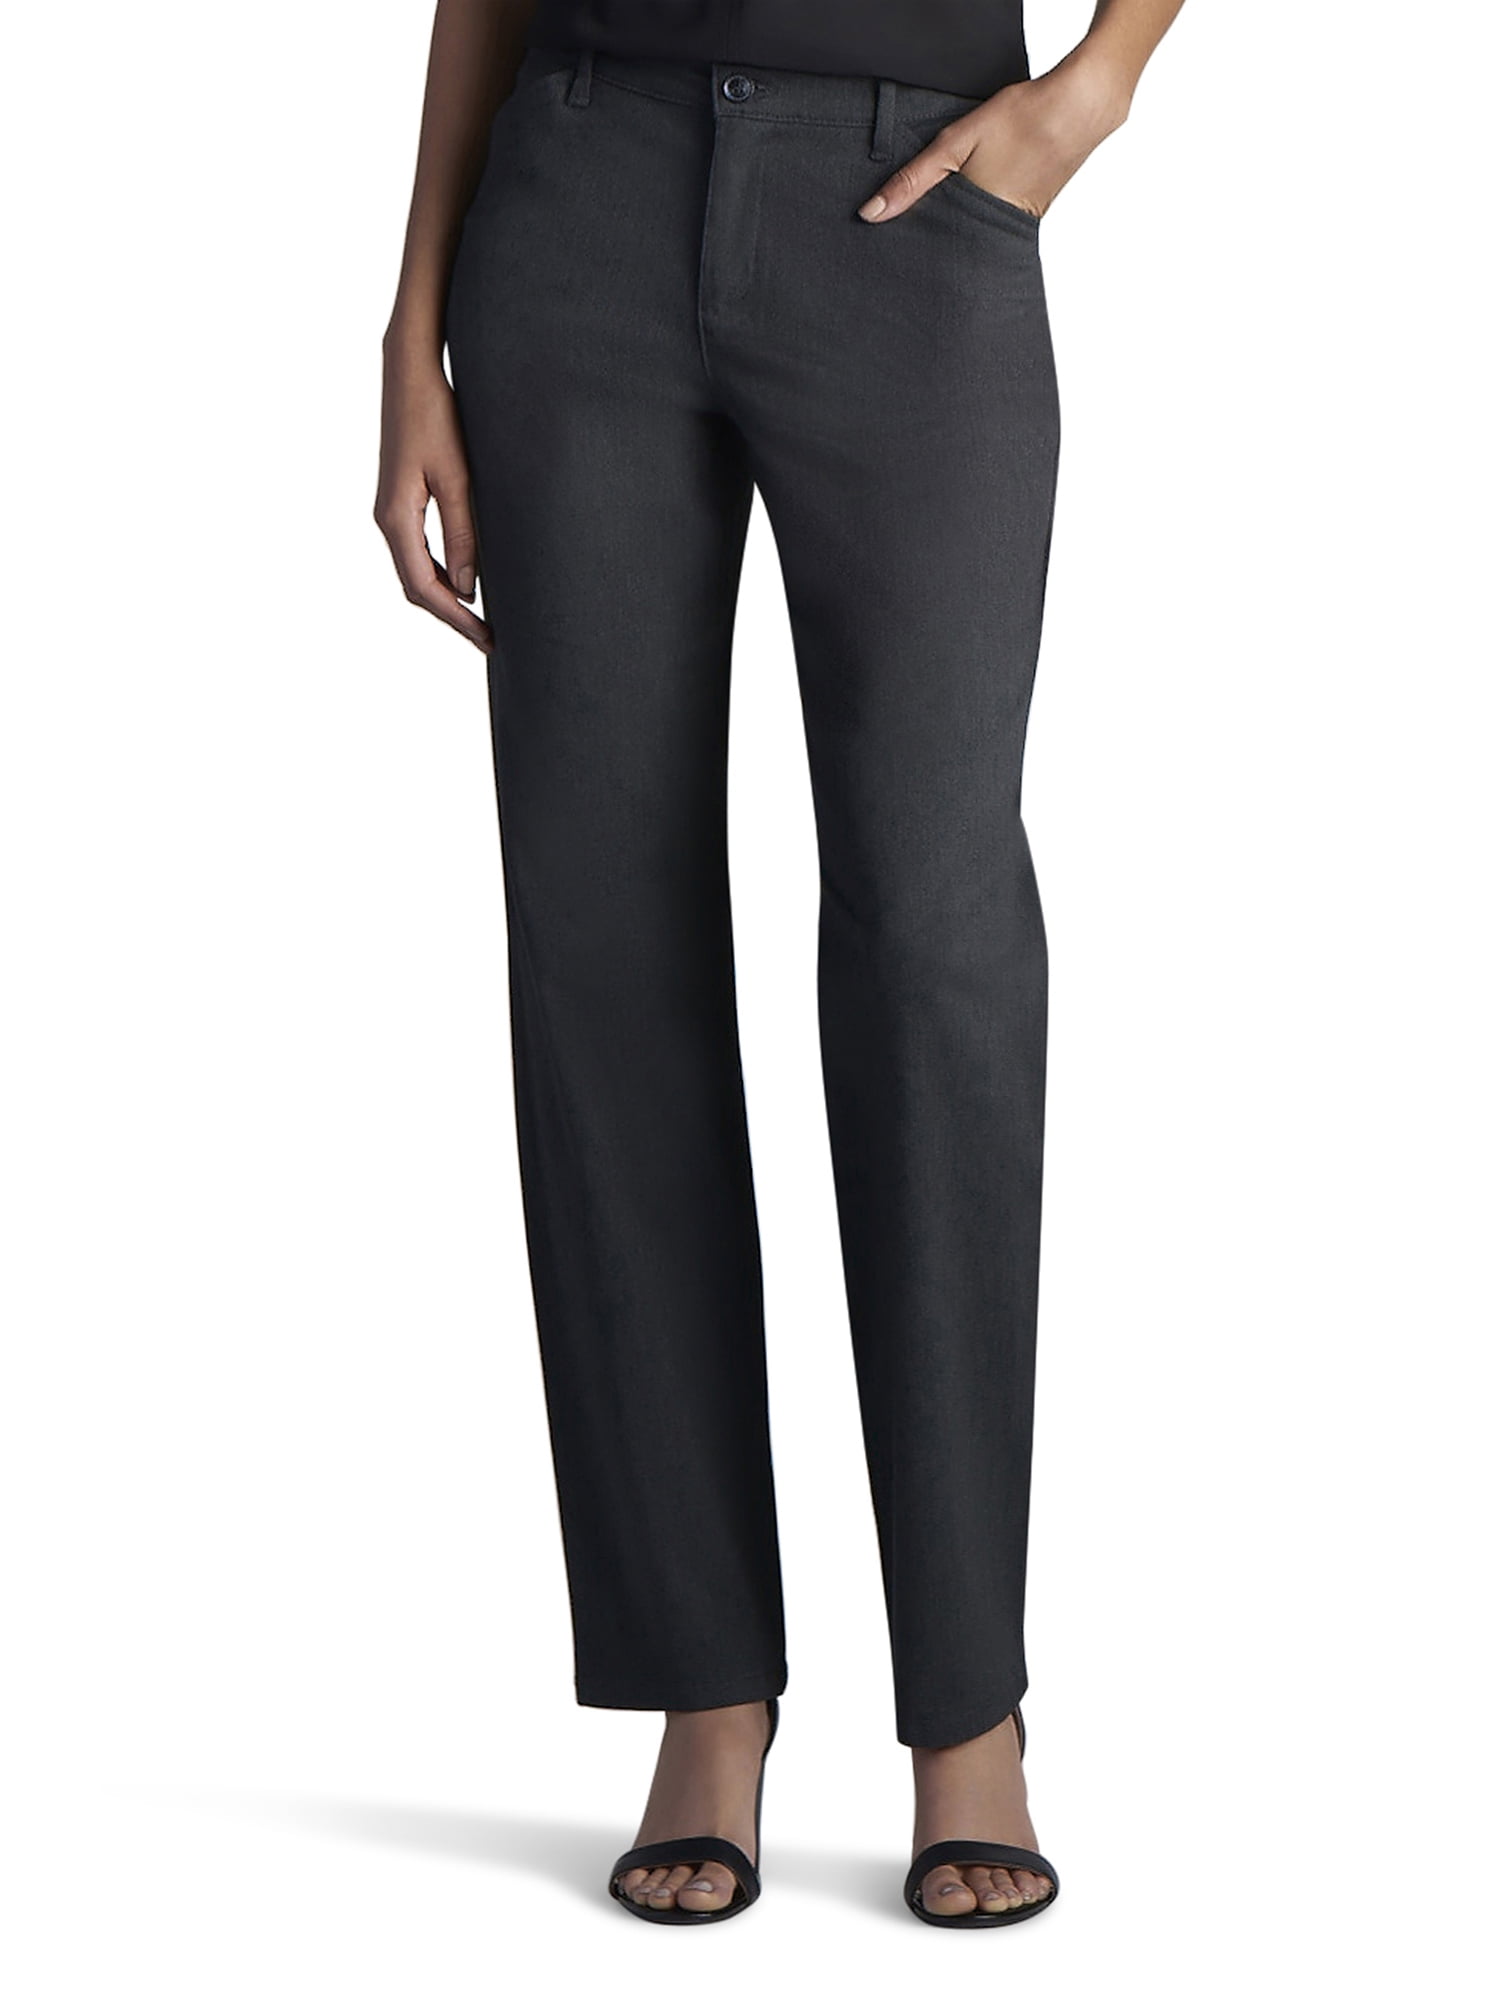 LEE Women’s Relaxed Fit All Day Straight Leg Pant 